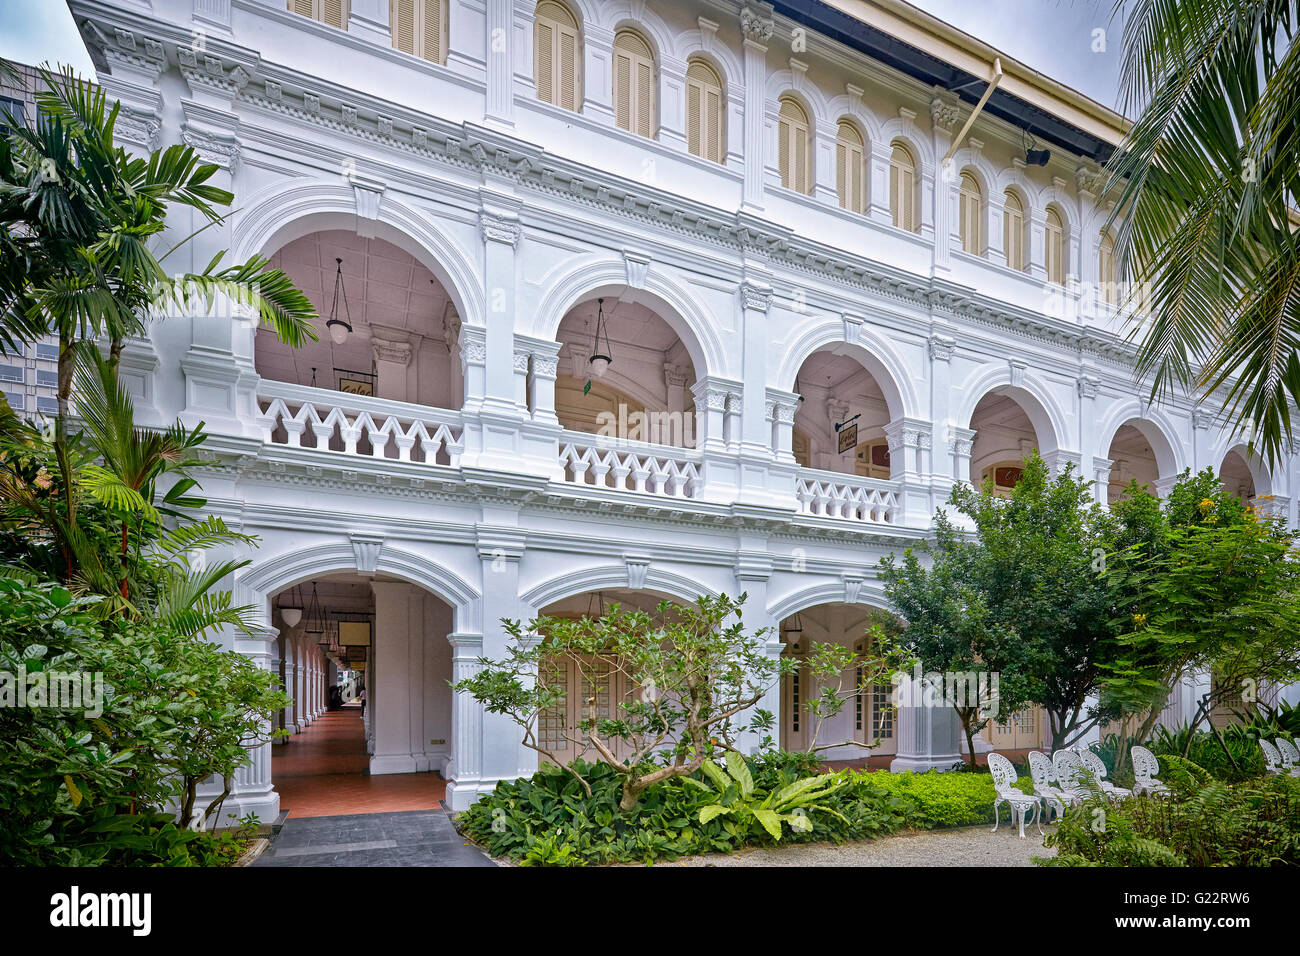 A detailed view of the facade of one of the courtyards in the Raffles Hotel in Singapore on July 11, 2012. Stock Photo